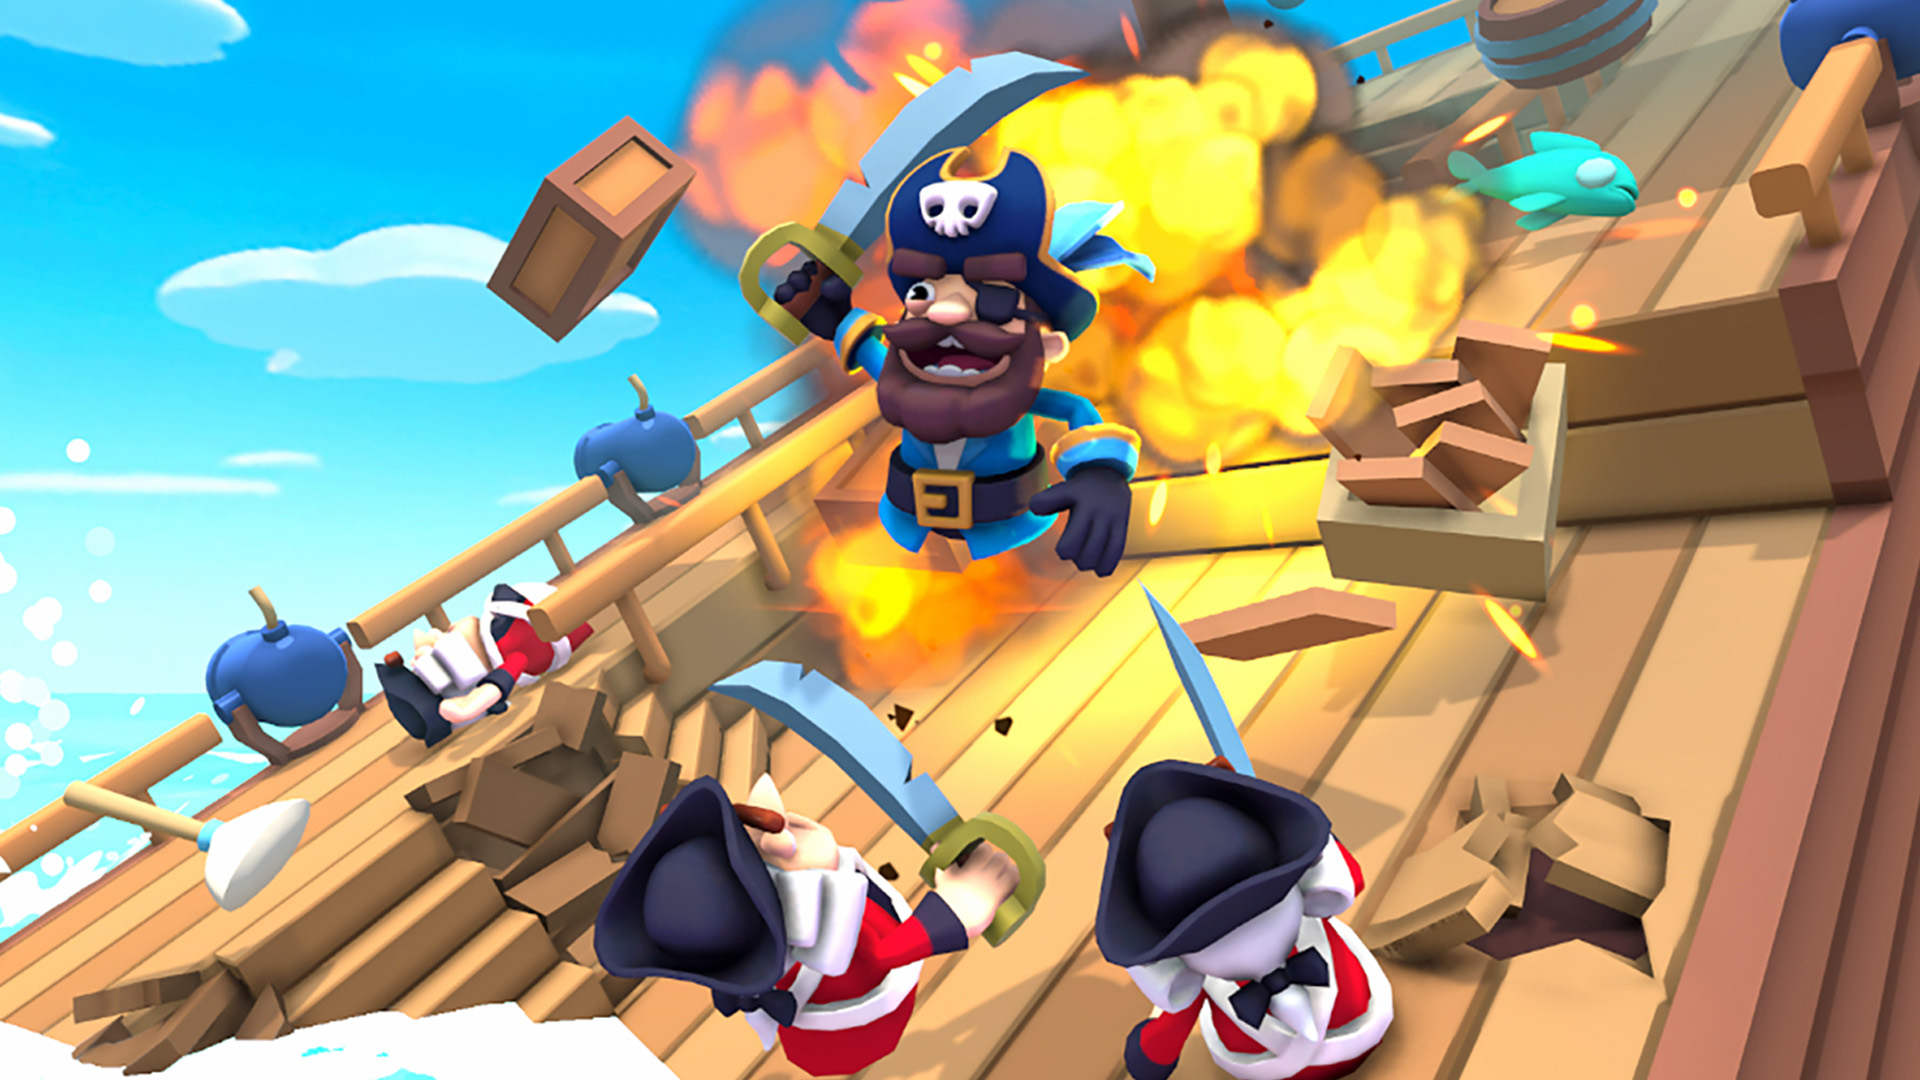 Overcooked meets Sea of Thieves in this couch co-op pirate game